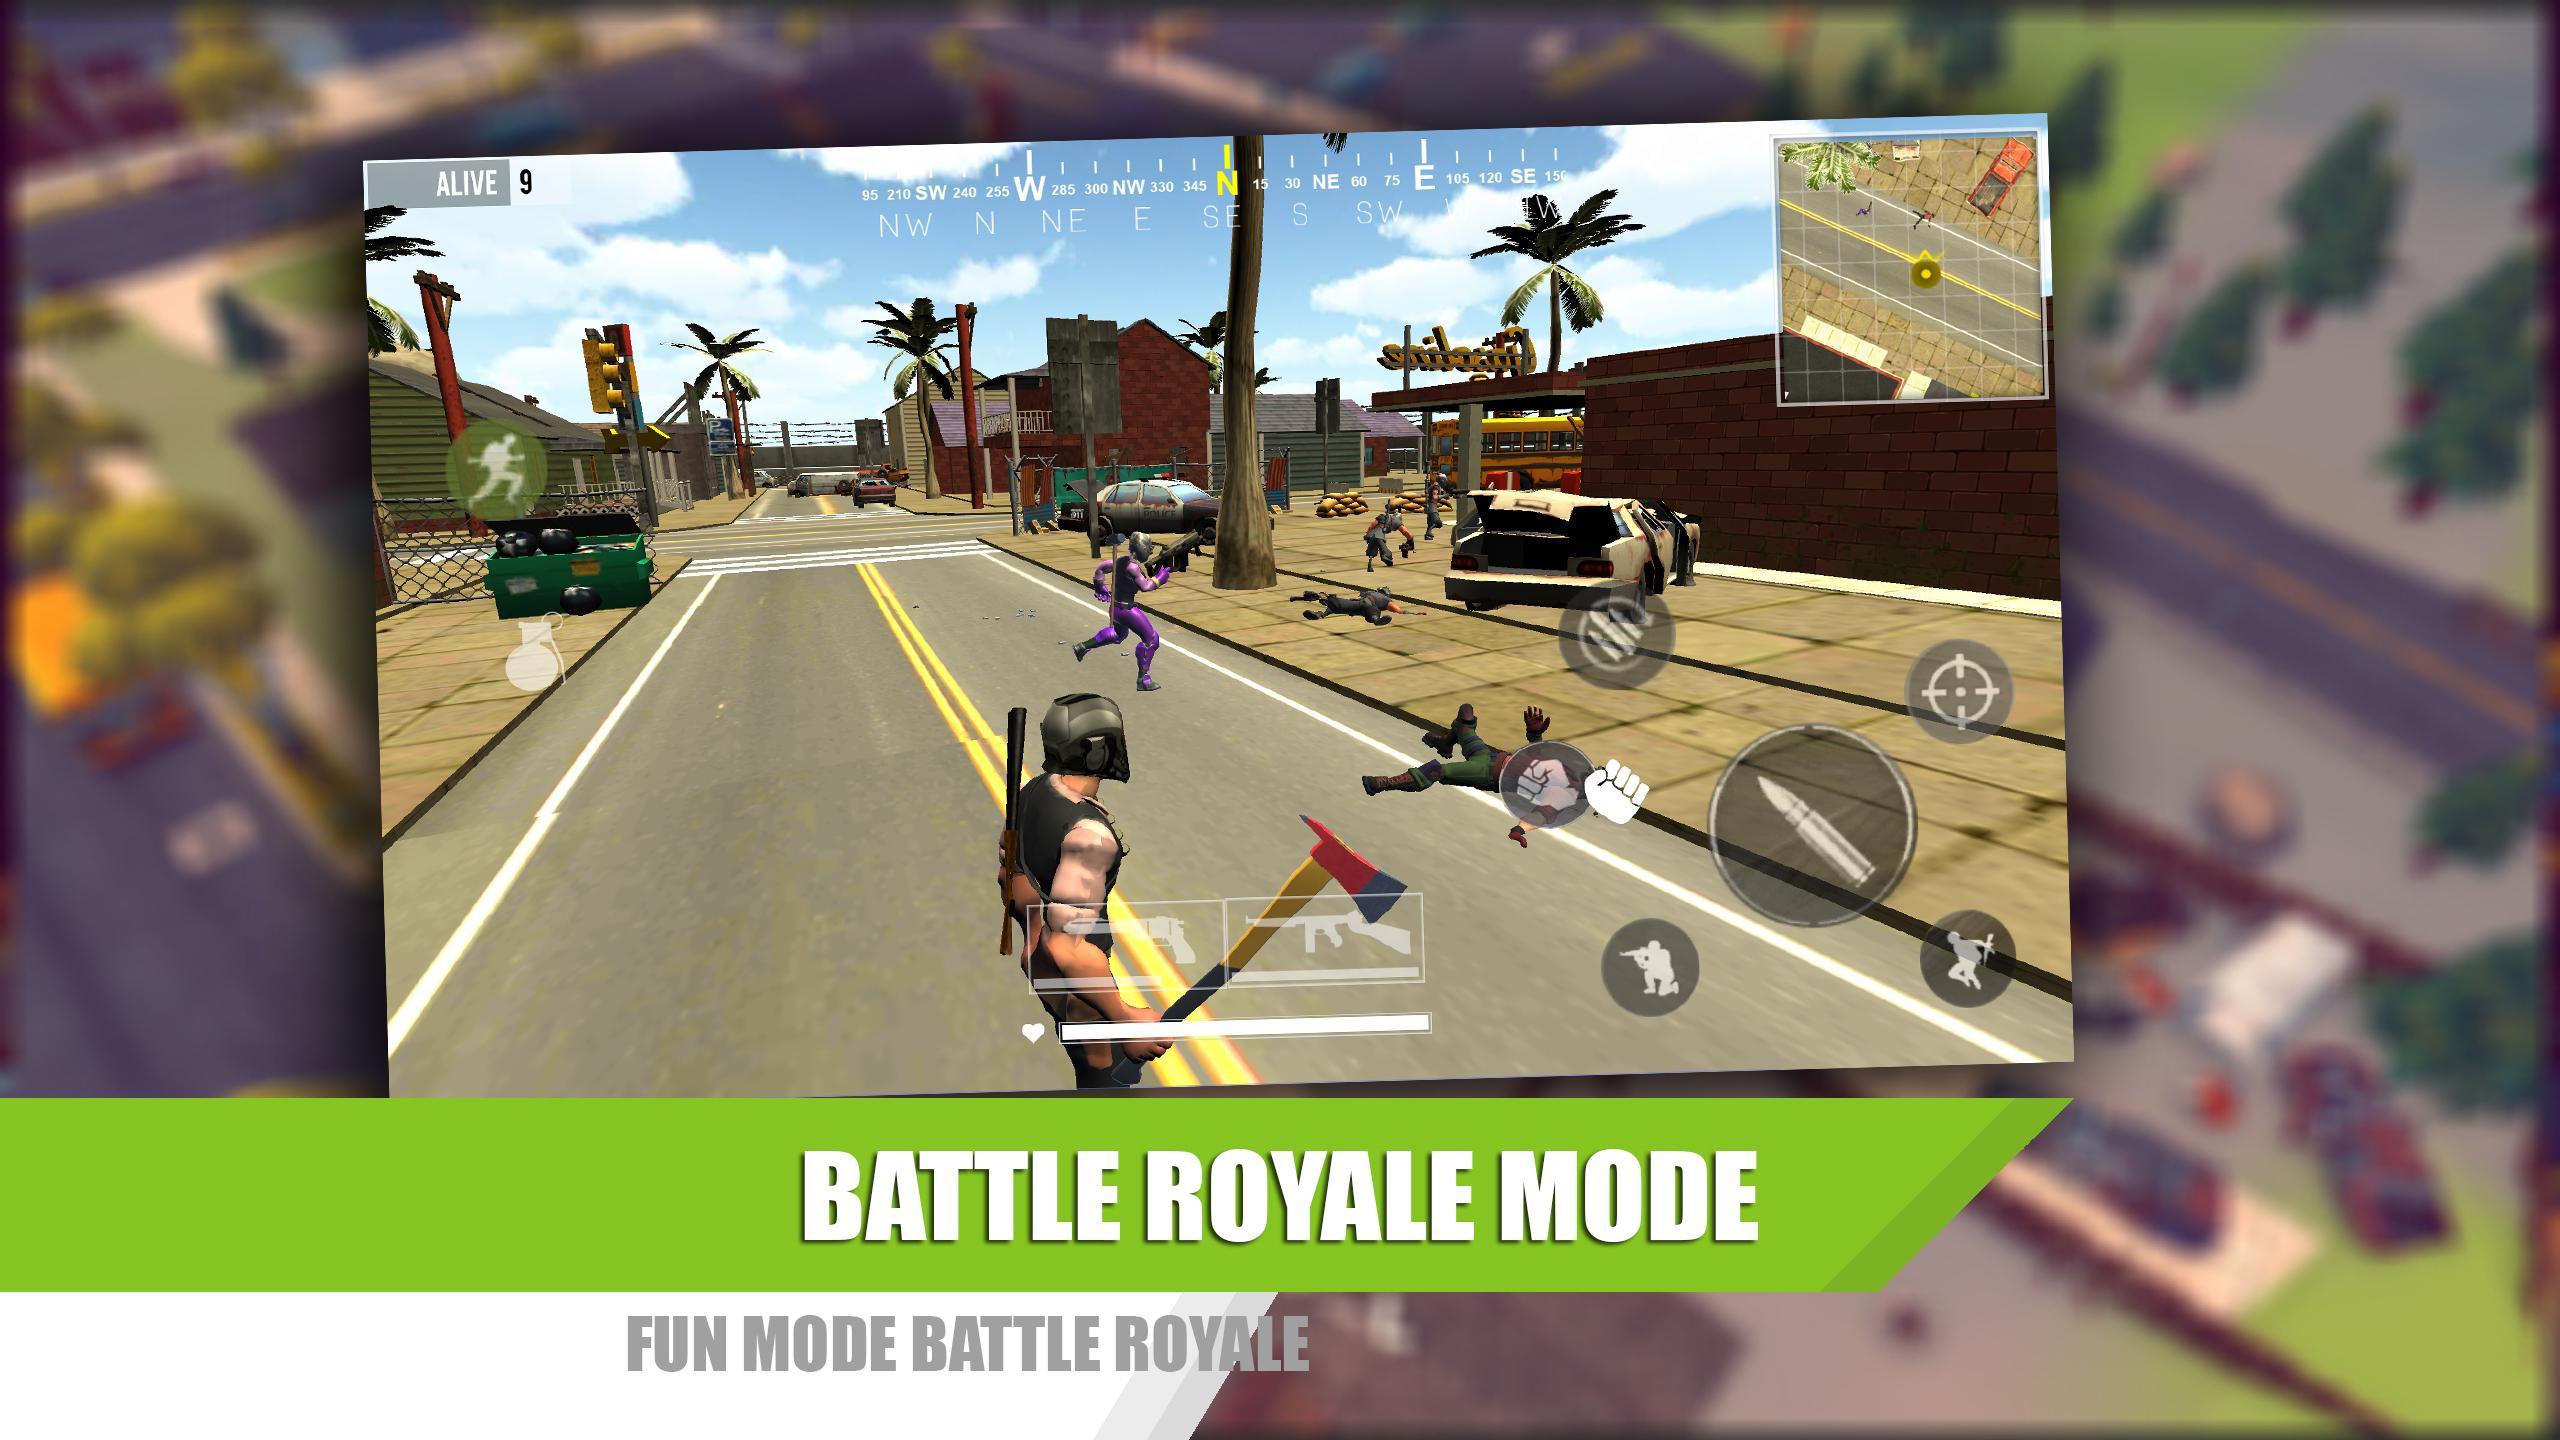 Play Fire Royale Free Online Shooting Games For Android Apk Download